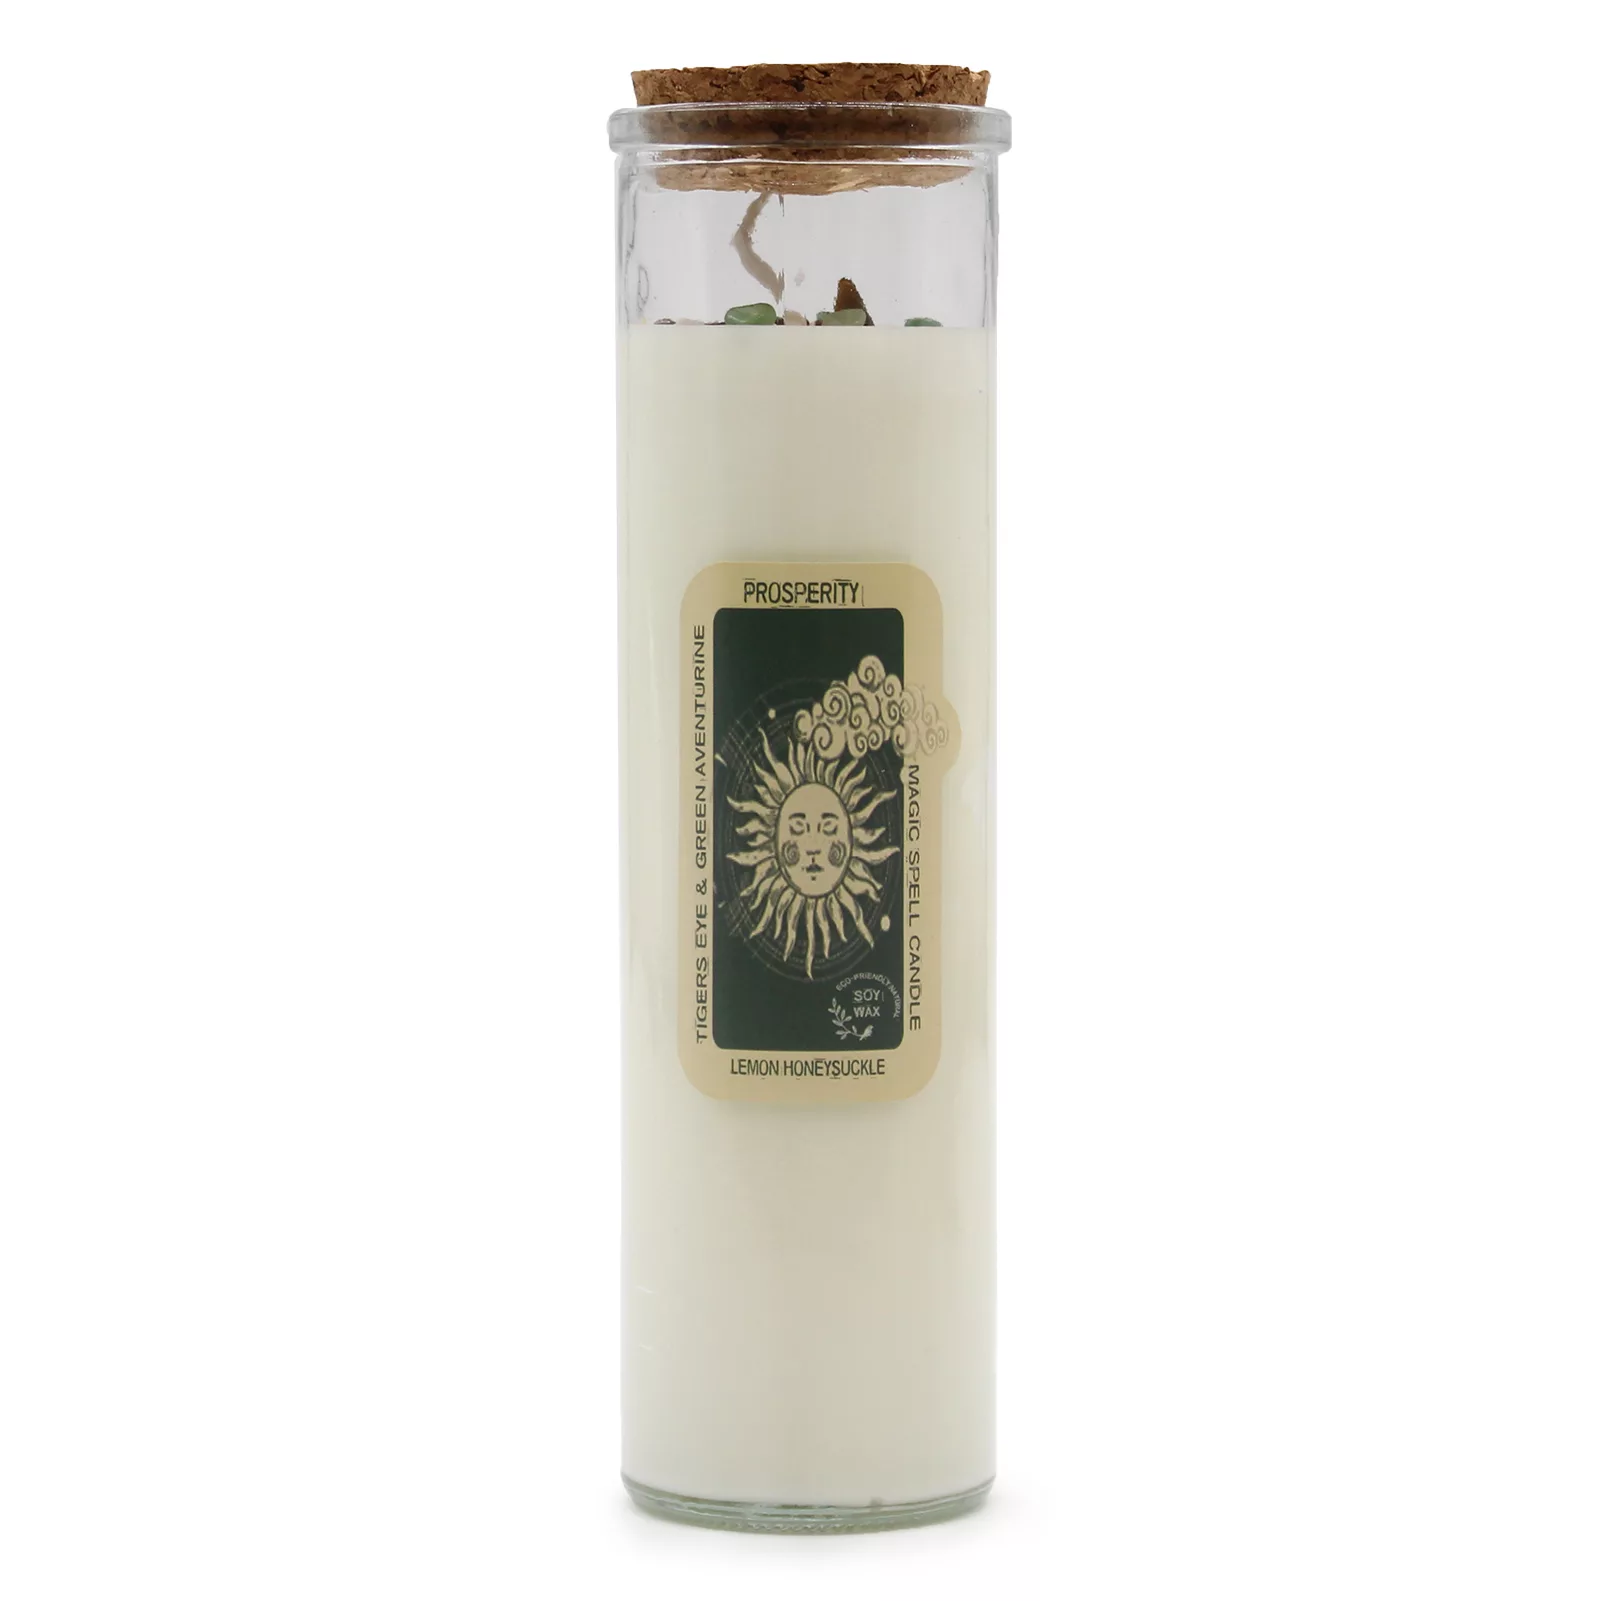 Magic Spell Candle – Prosperity